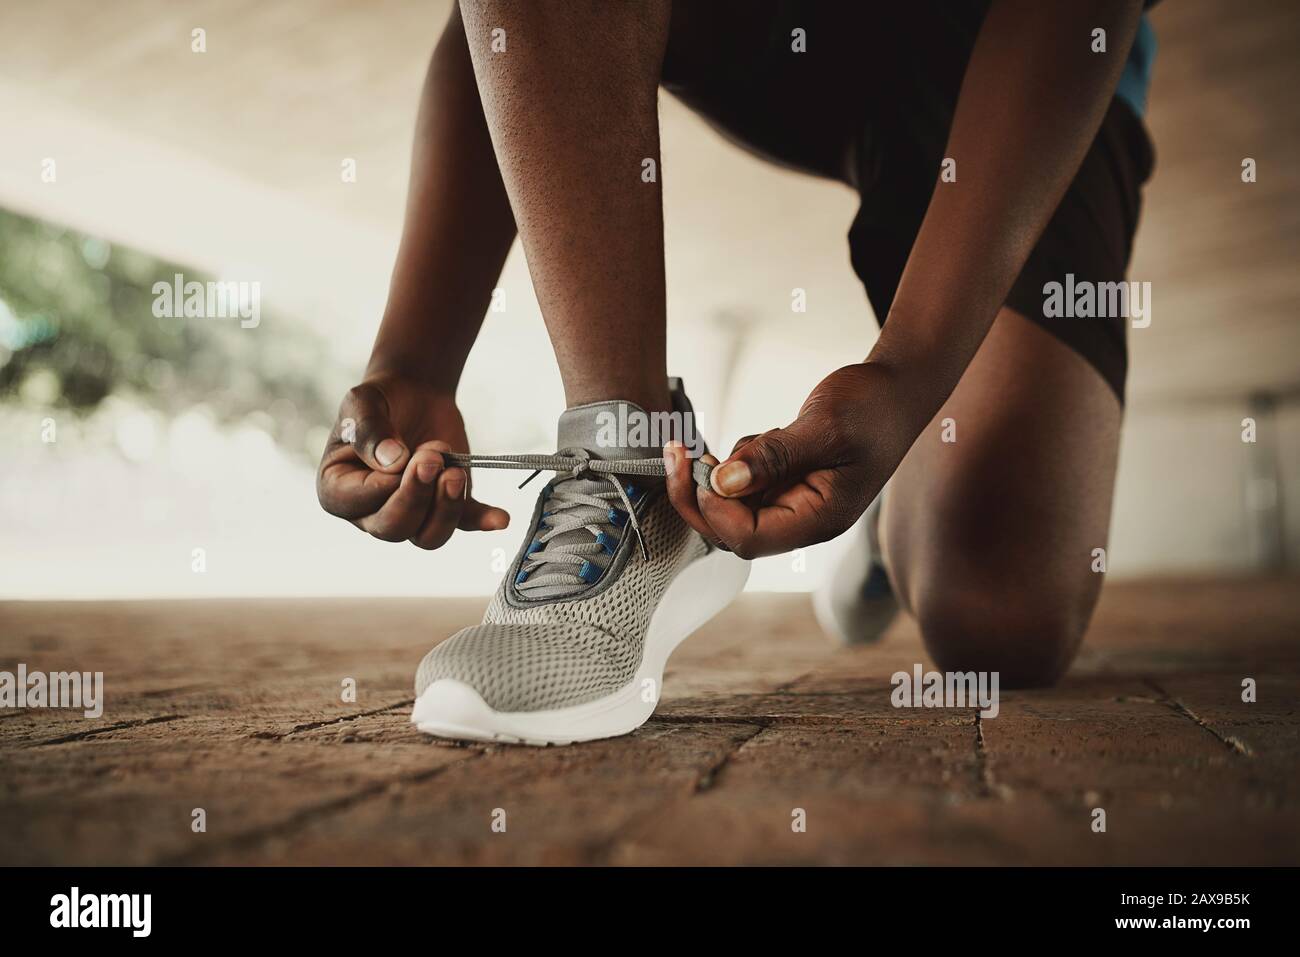 Running Shoes High Resolution Stock Photography and Images - Alamy